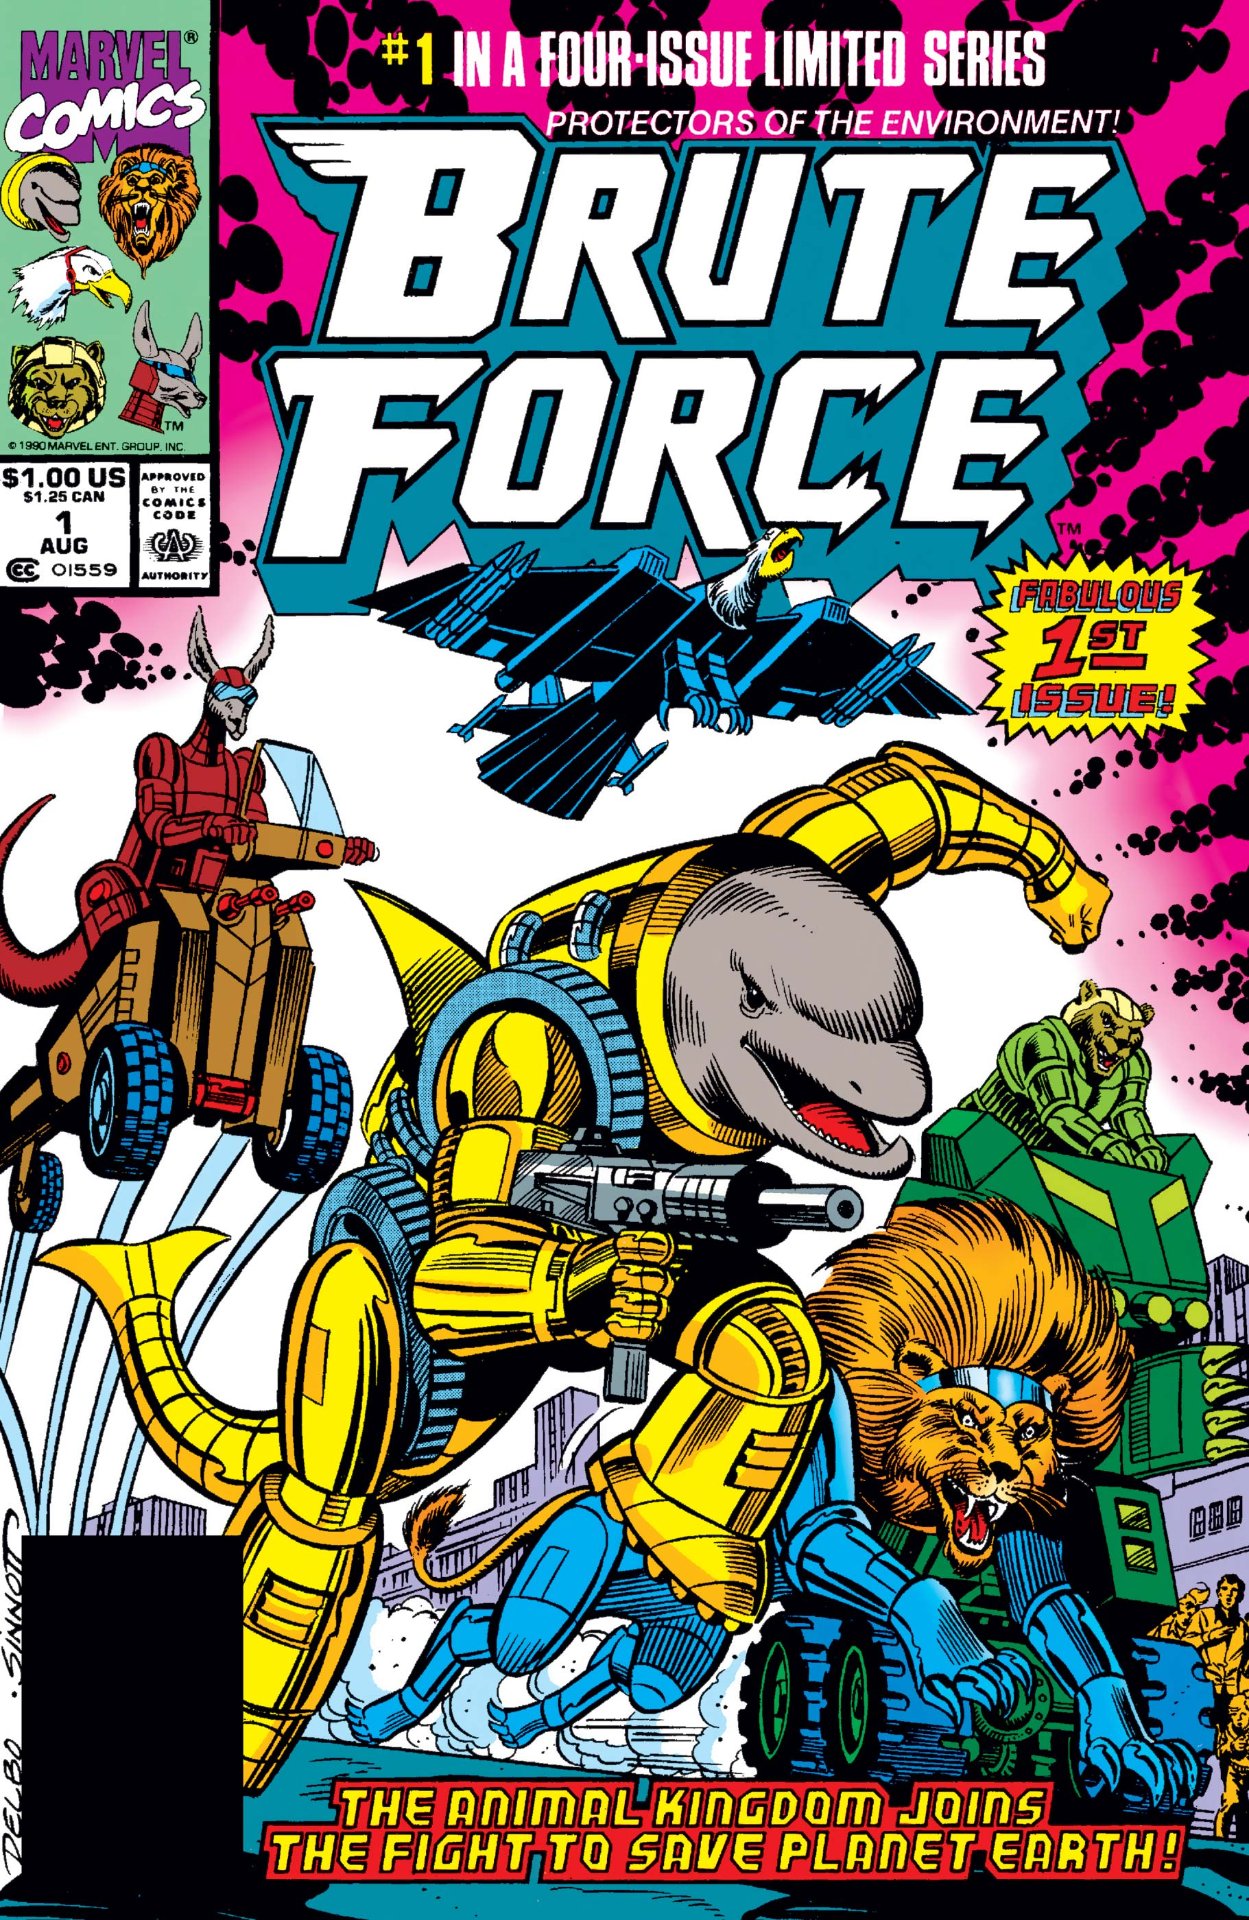 Brute Force #1 cover